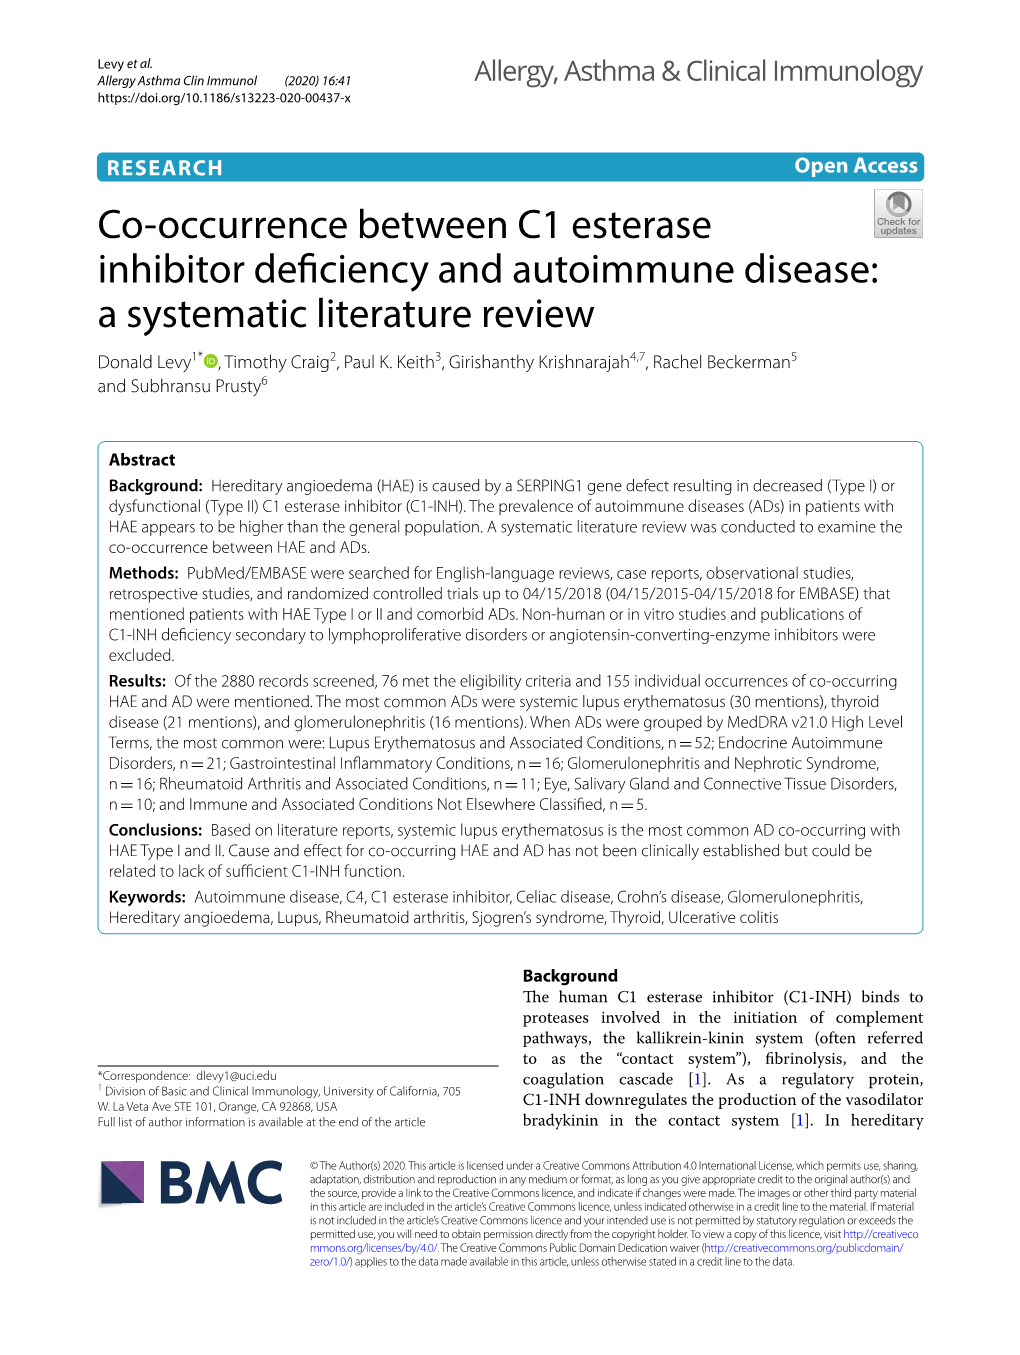 Co-Occurrence Between C1 Esterase Inhibitor Deficiency And